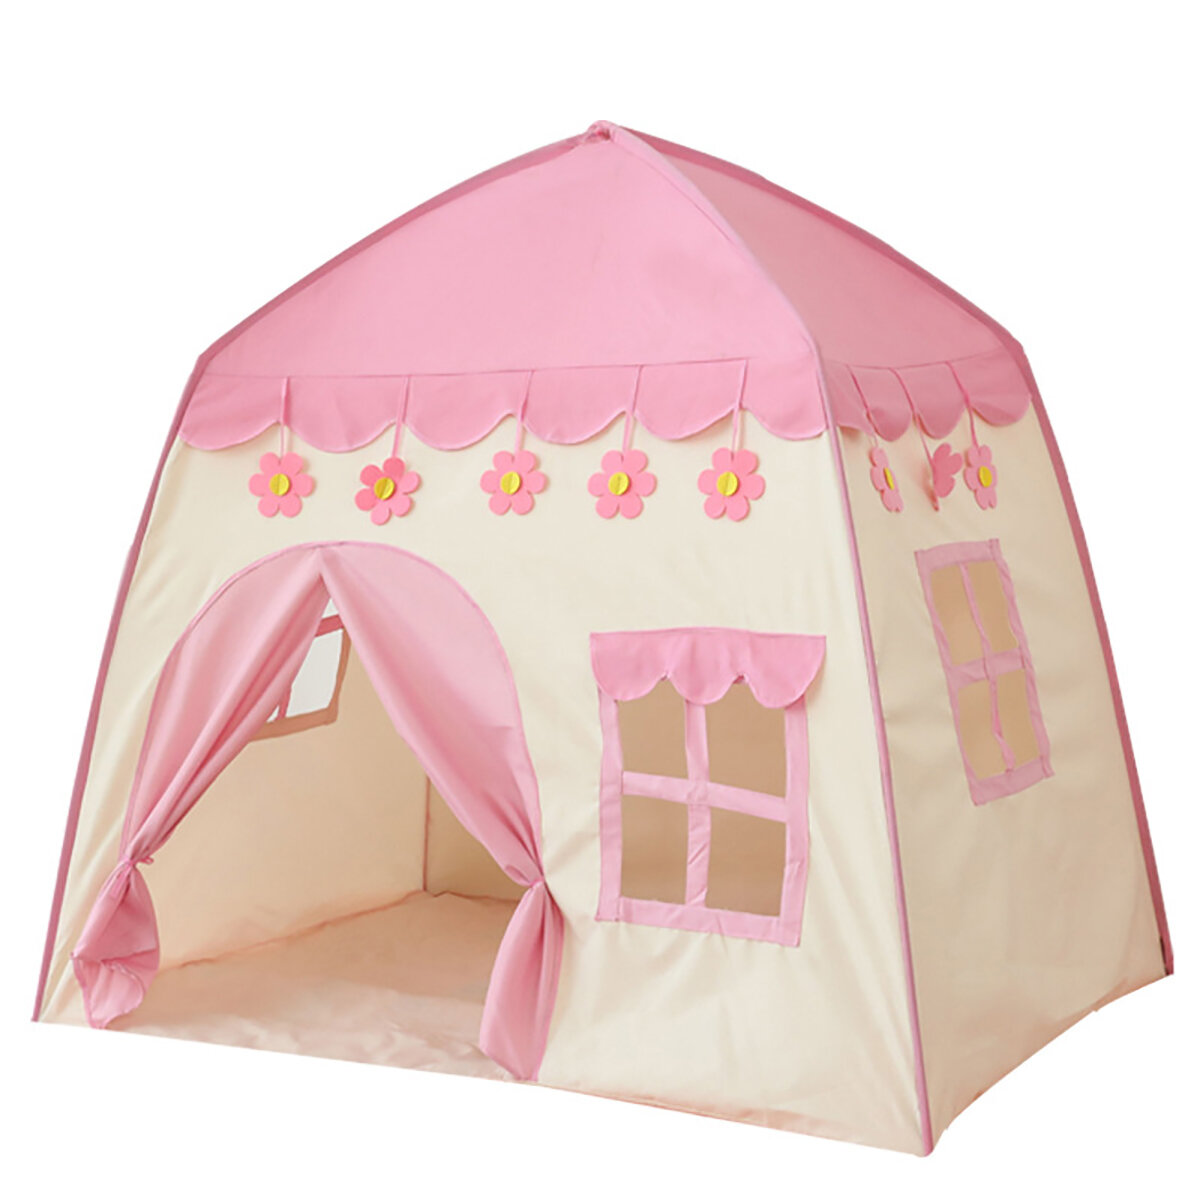 51inch Large Sturdy Kids Play Tent Princess Playhouse Castle Children Fairy Tale Teepee Indoor/Outdoor with Carry Bag fo